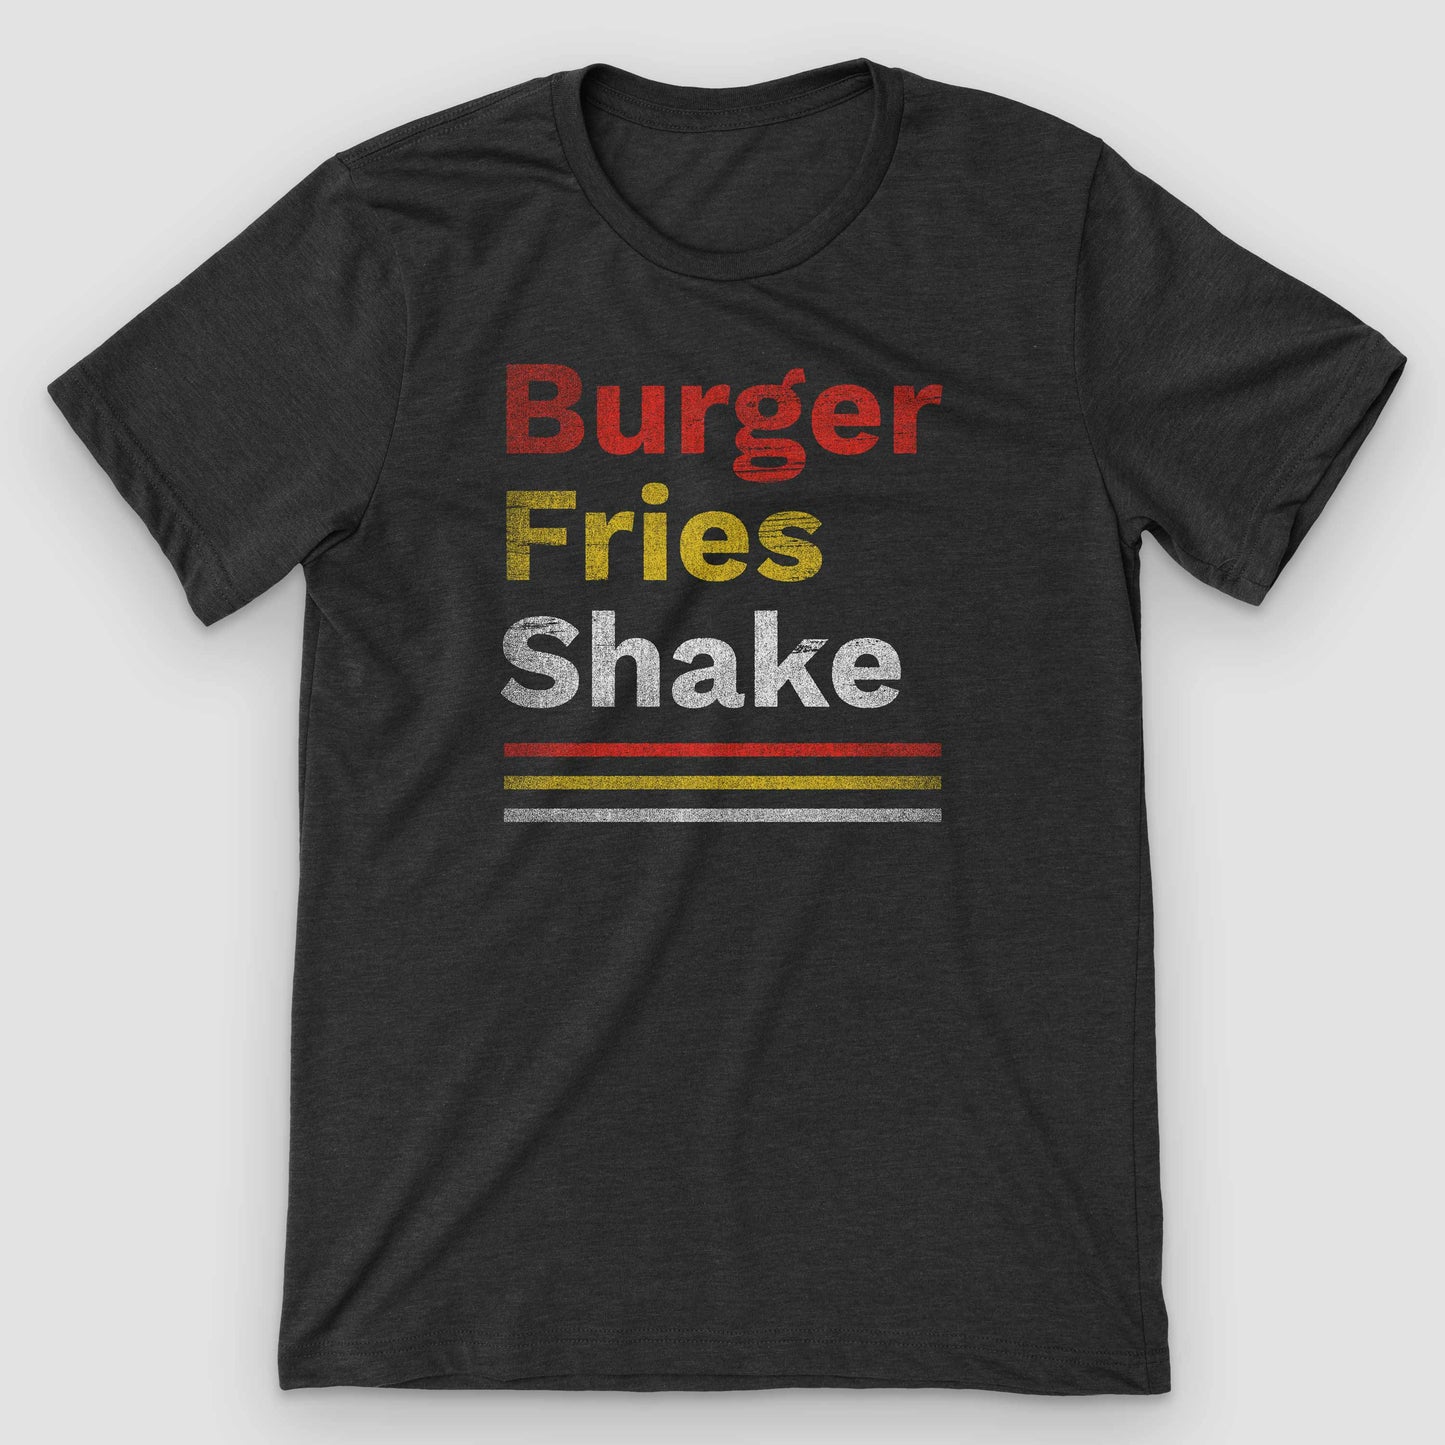  Retro Fast Food Burger Fries Shake T-Shirt by Snaxtime